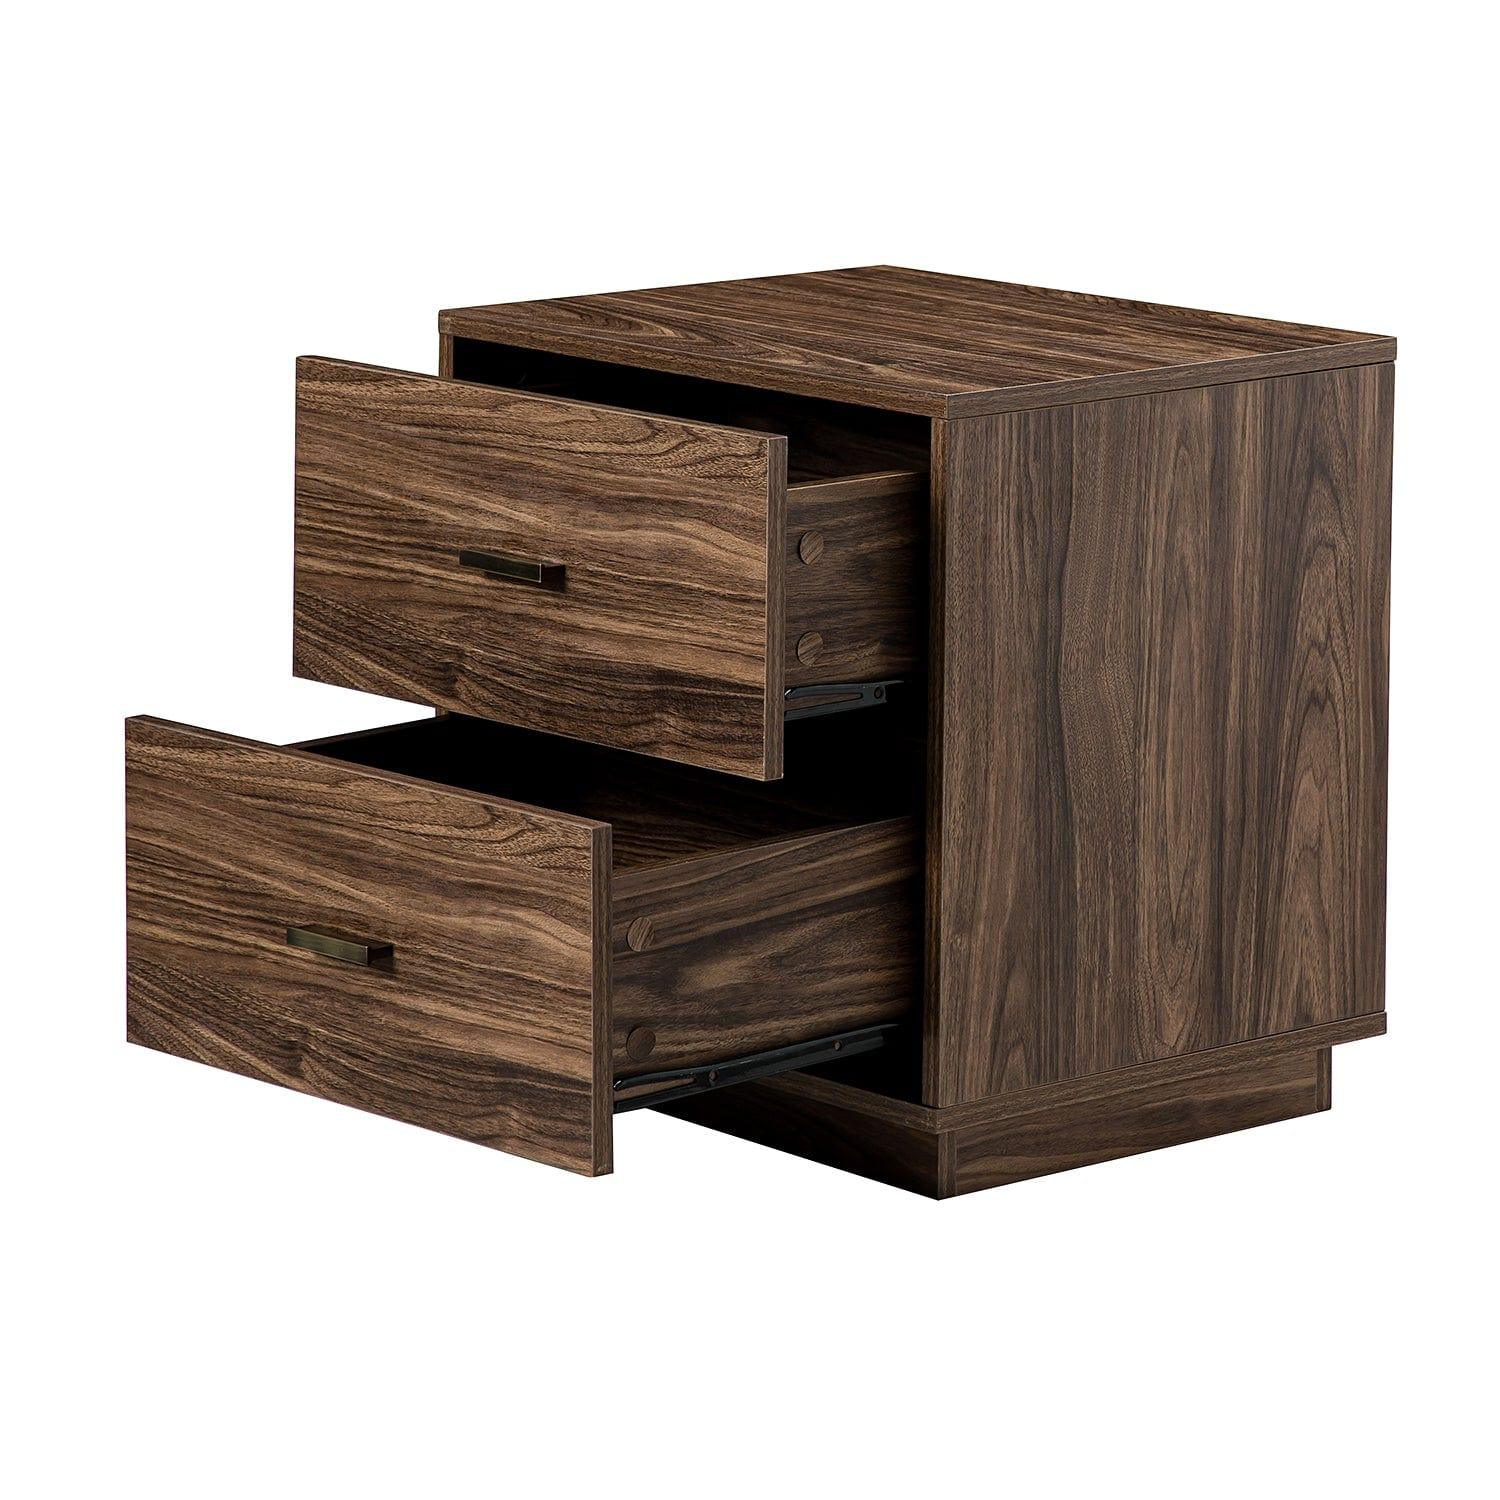 Shop Phthia 2-Drawer End table with Storage Mademoiselle Home Decor